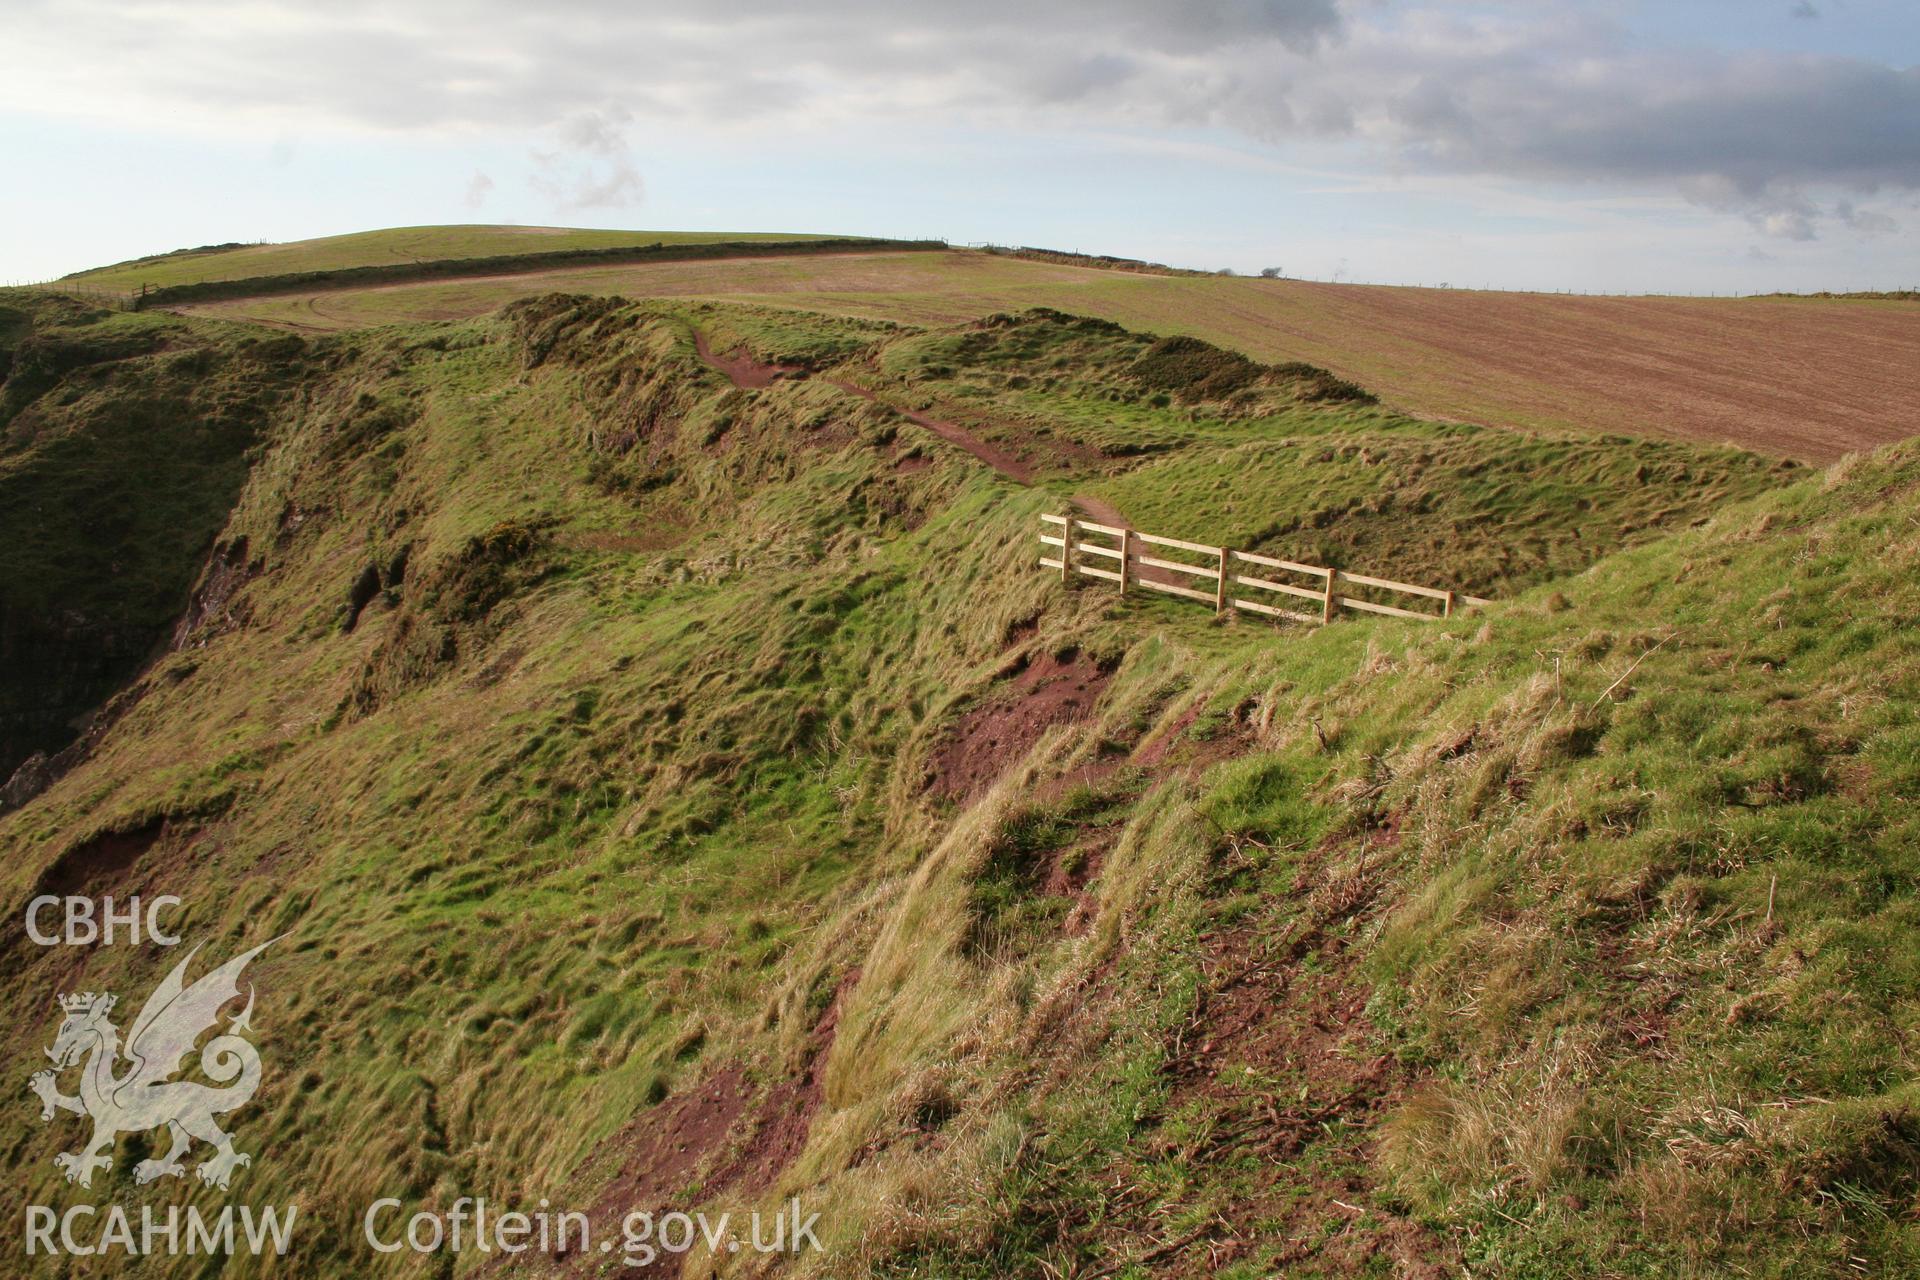 Looking north-west across the ramparts (and their erosion) defining the annexe of the fort.